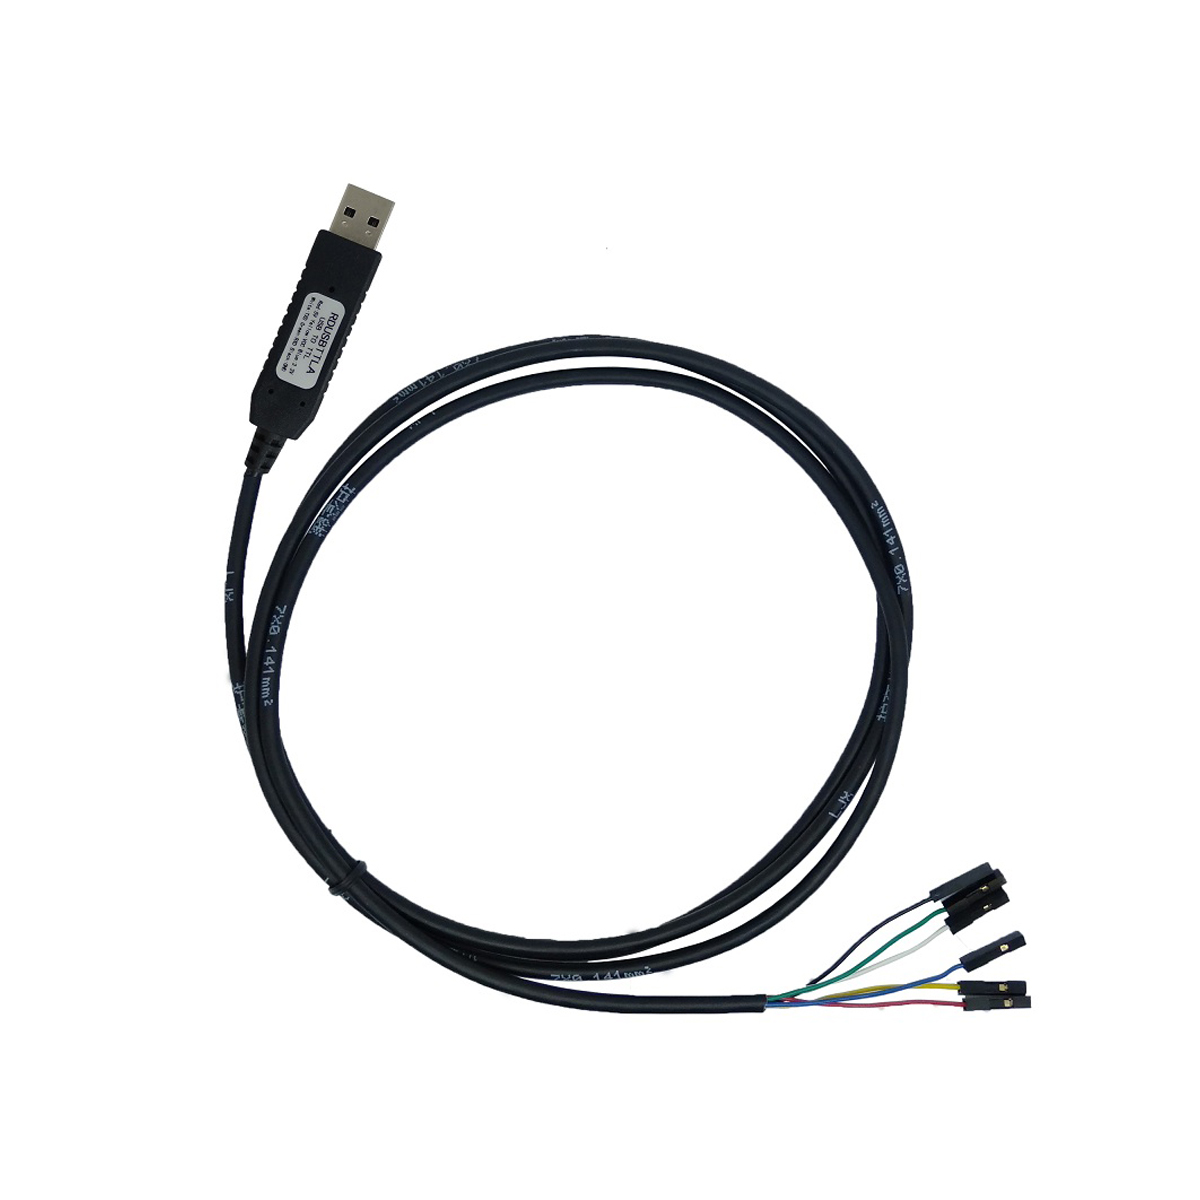 PCsensor USB Switching Cable USB to TTL serial cable